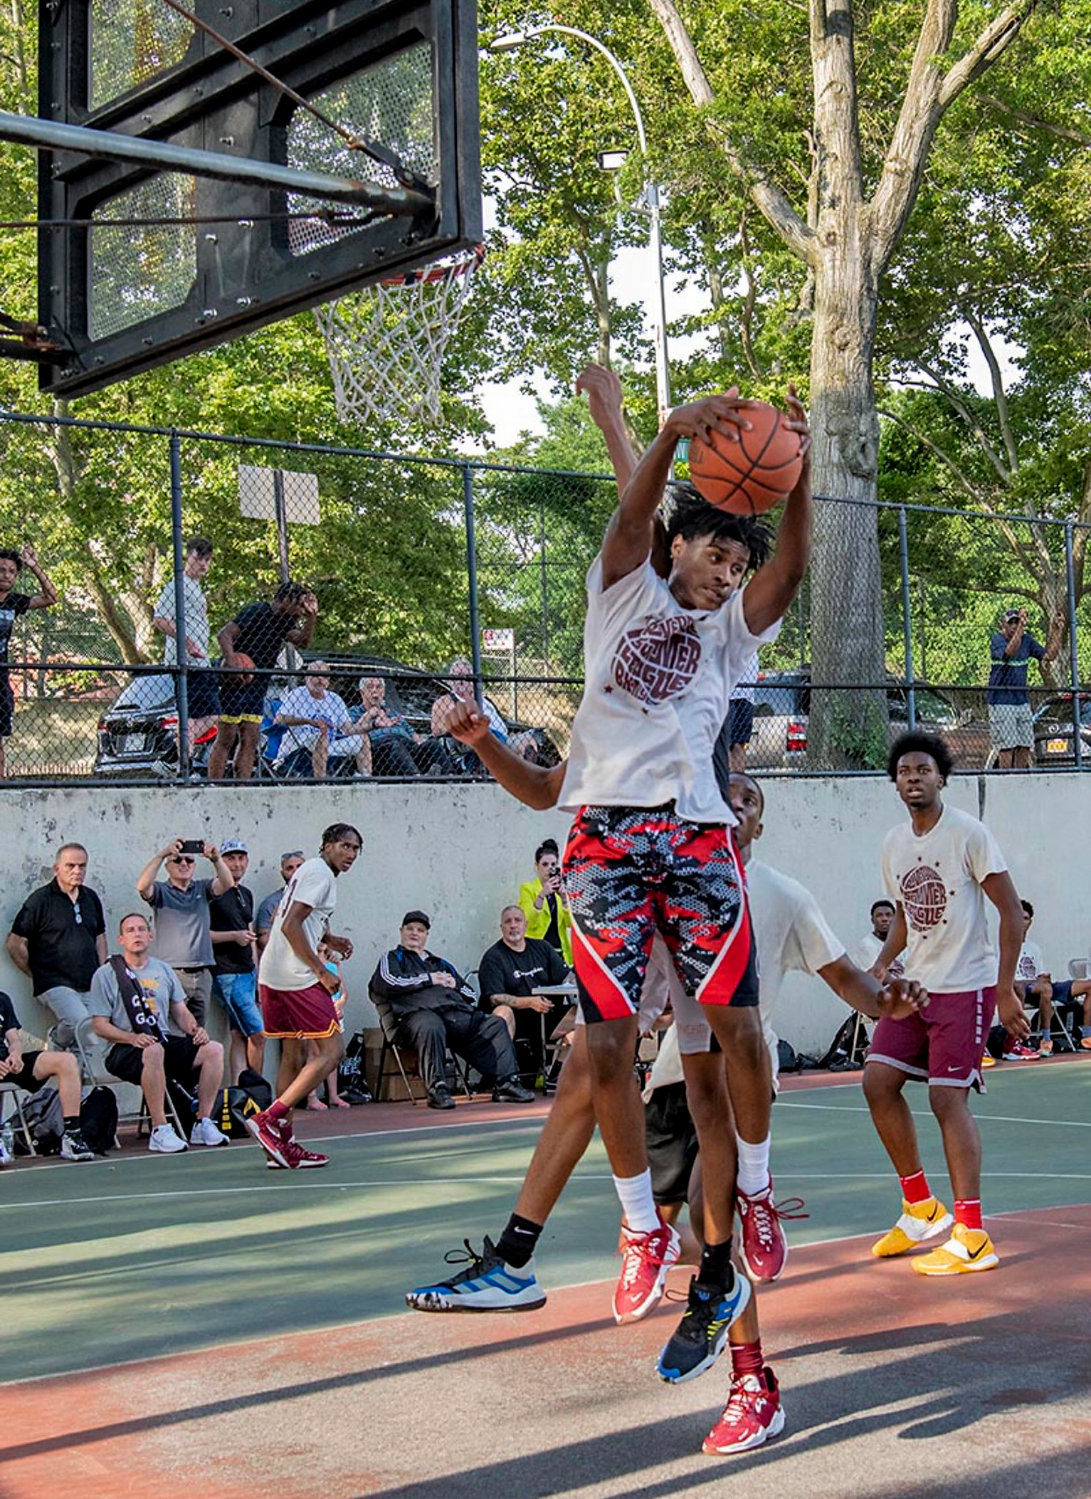 The Riverdale Summer League is in its second year after being created by local basketball aficionados Turk Gumusdere, Barry Rohrssen and Artie Cox. The local residents are trying to get all the biggest basketball schools across New York City to come out.